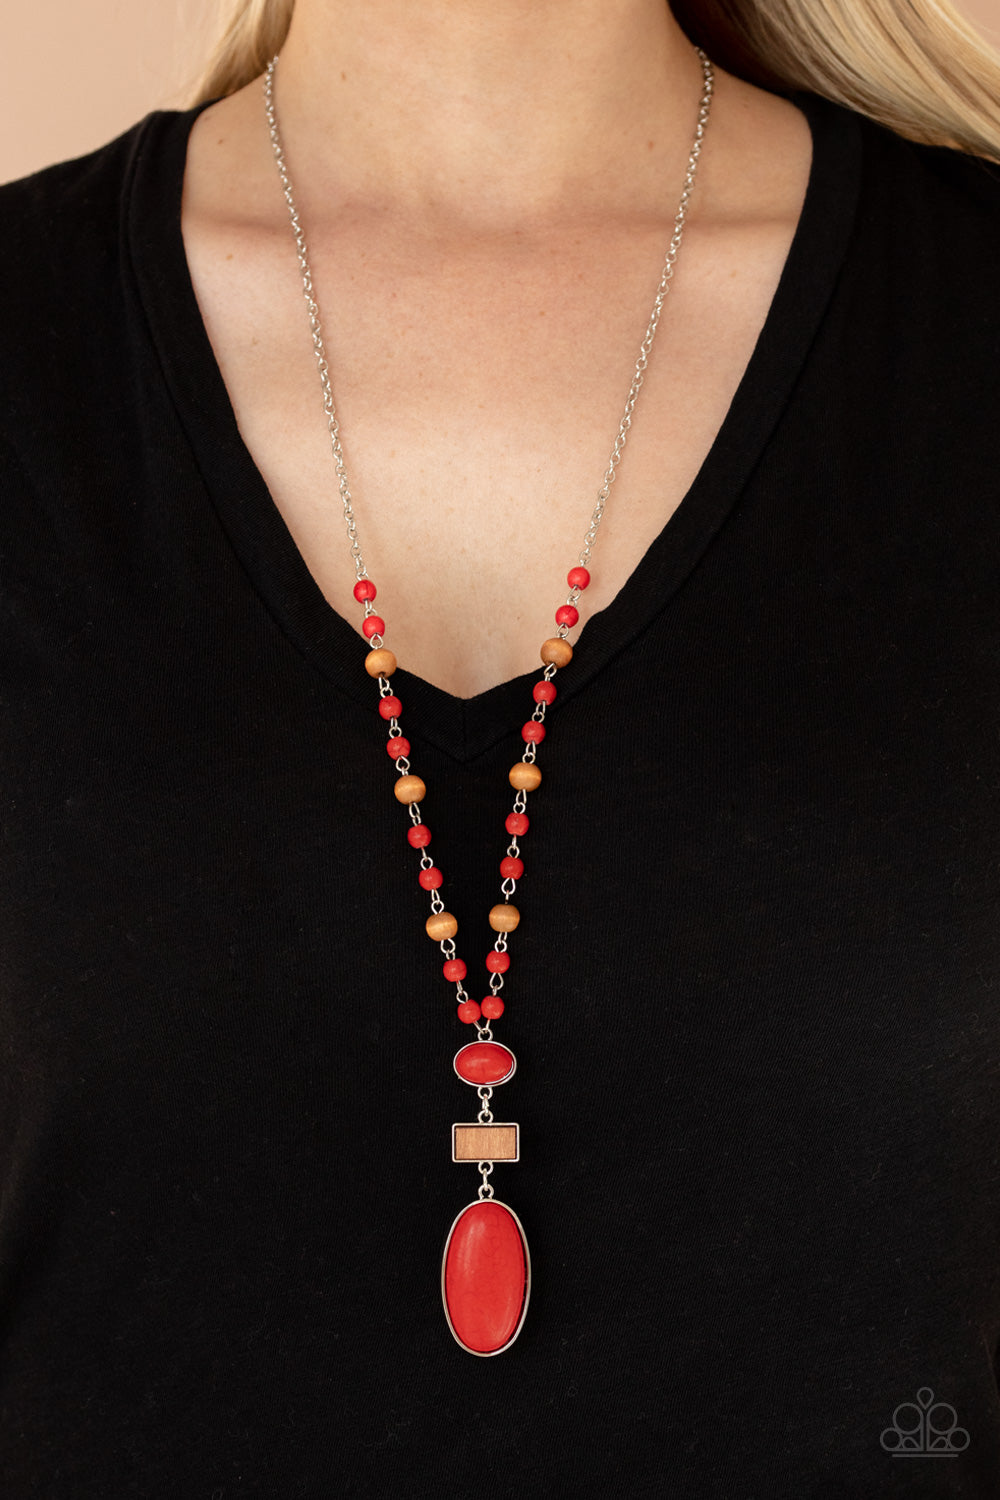 Naturally Essential Red Necklace - Paparazzi Accessories  A dainty collection of fiery red stone and rustic wooden beads connect into an earthy chain across the chest. Featuring sleek silver frames, oval red stones and a rectangular wood frame connect into a dramatically stacked seasonal pendant at the bottom for a colorful display. Features an adjustable clasp closure.  Sold as one individual necklace. Includes one pair of matching earrings.